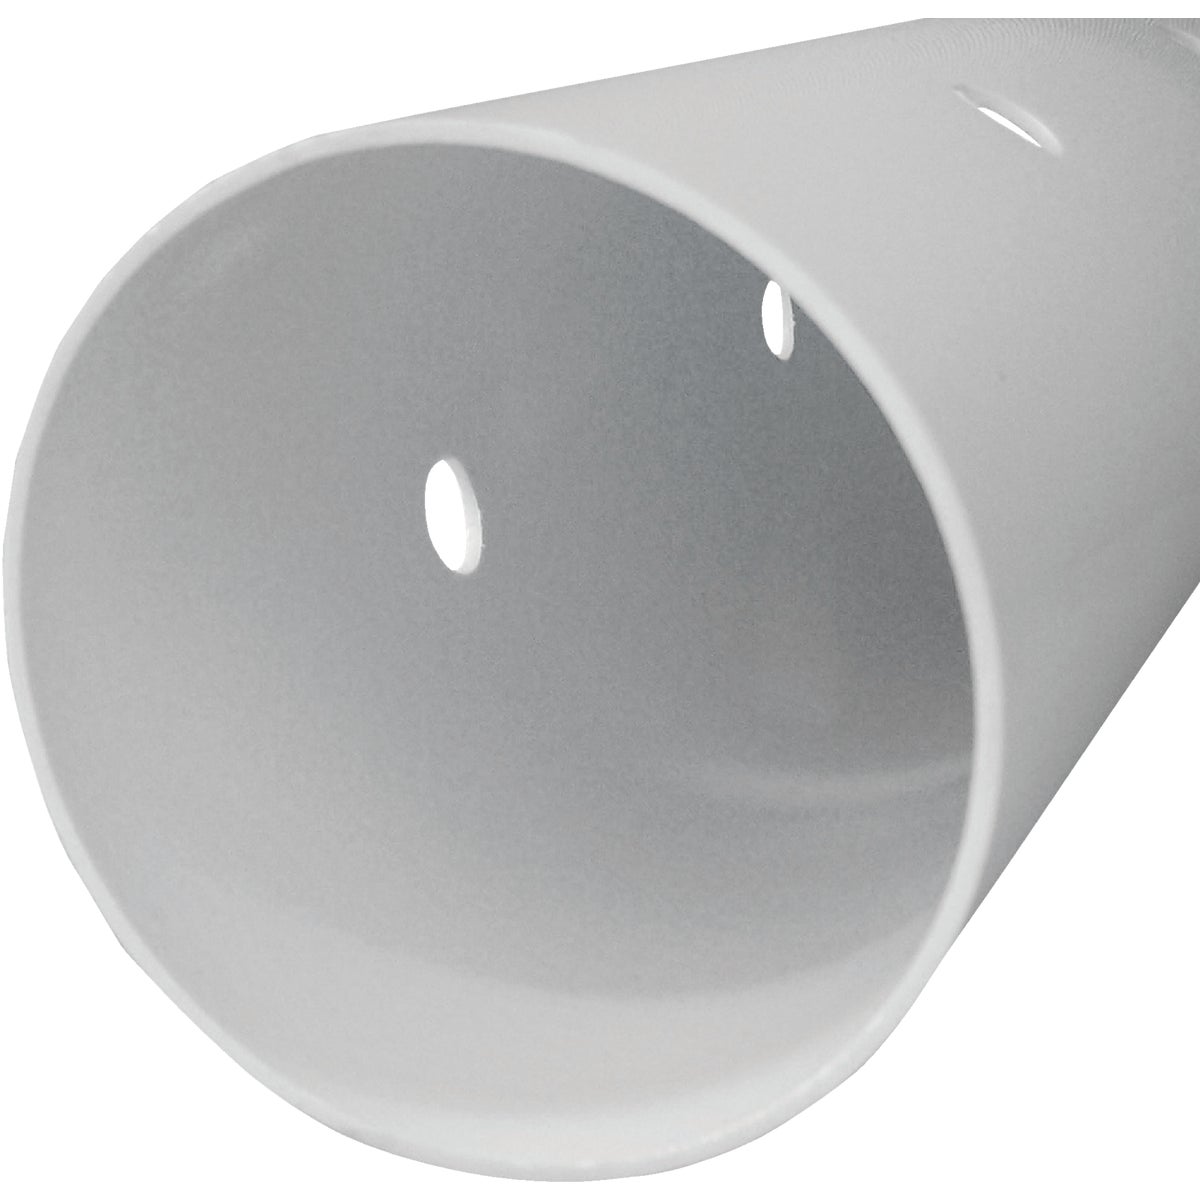 Item 463701, PVC 2729 Sewer Pipe is for sewer and storm drainage applications only.